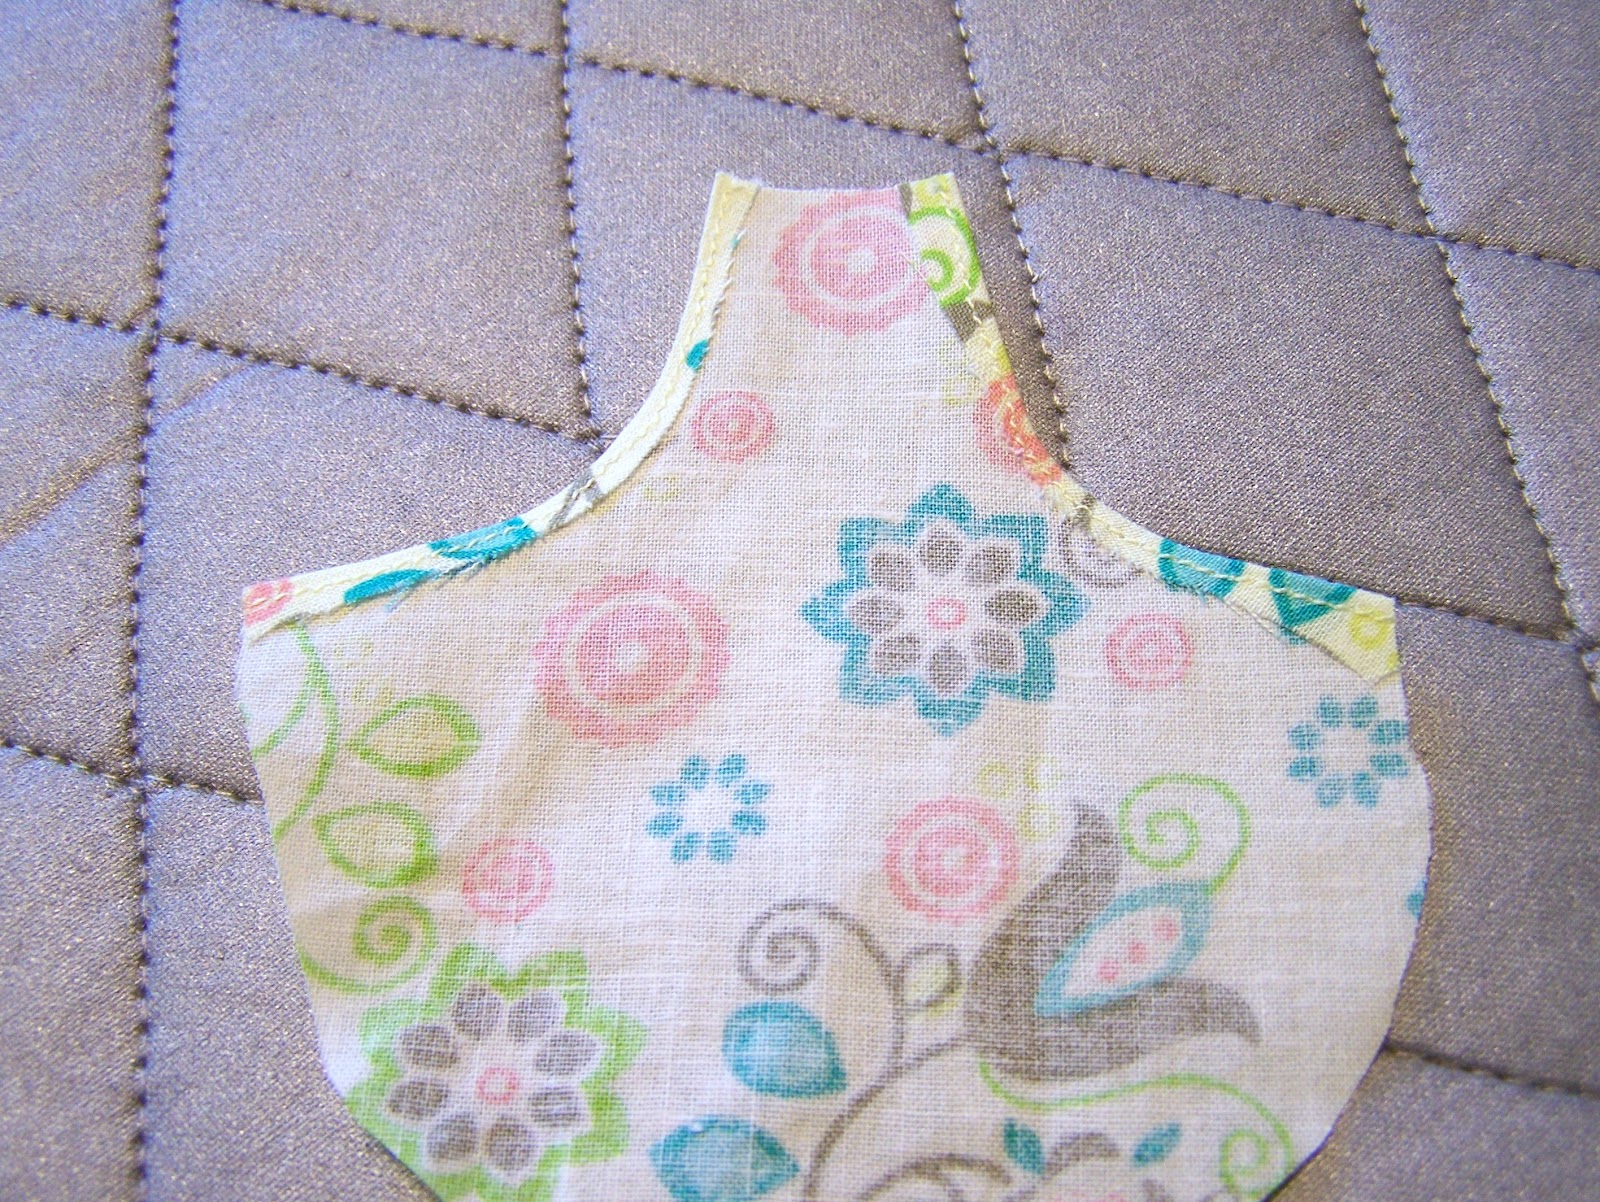 Damsel Quilts & Crafts: Aprons on the Clothesline